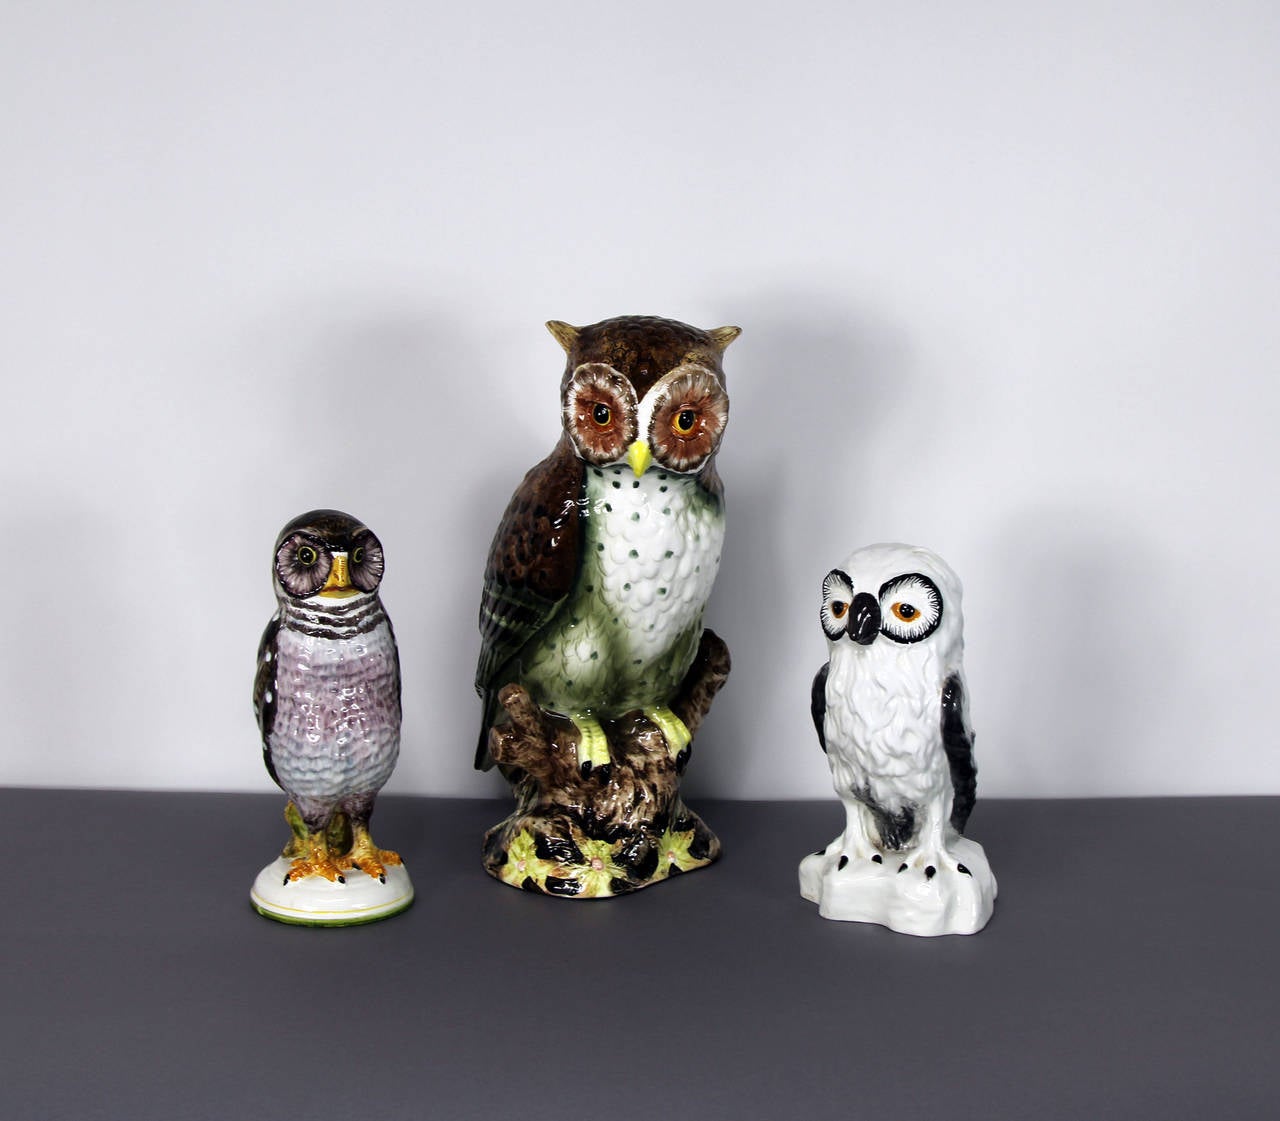 Three vintage hand-painted ceramic owls made in Italy in the 1970s, the two small owls are marked Meiselman, the large owl is not signed.

Large Owl: 15 inches high, 8 inches wide and 9 inches deep.
Small White Owl: 9 ½ inches high, 5 ¼ inches